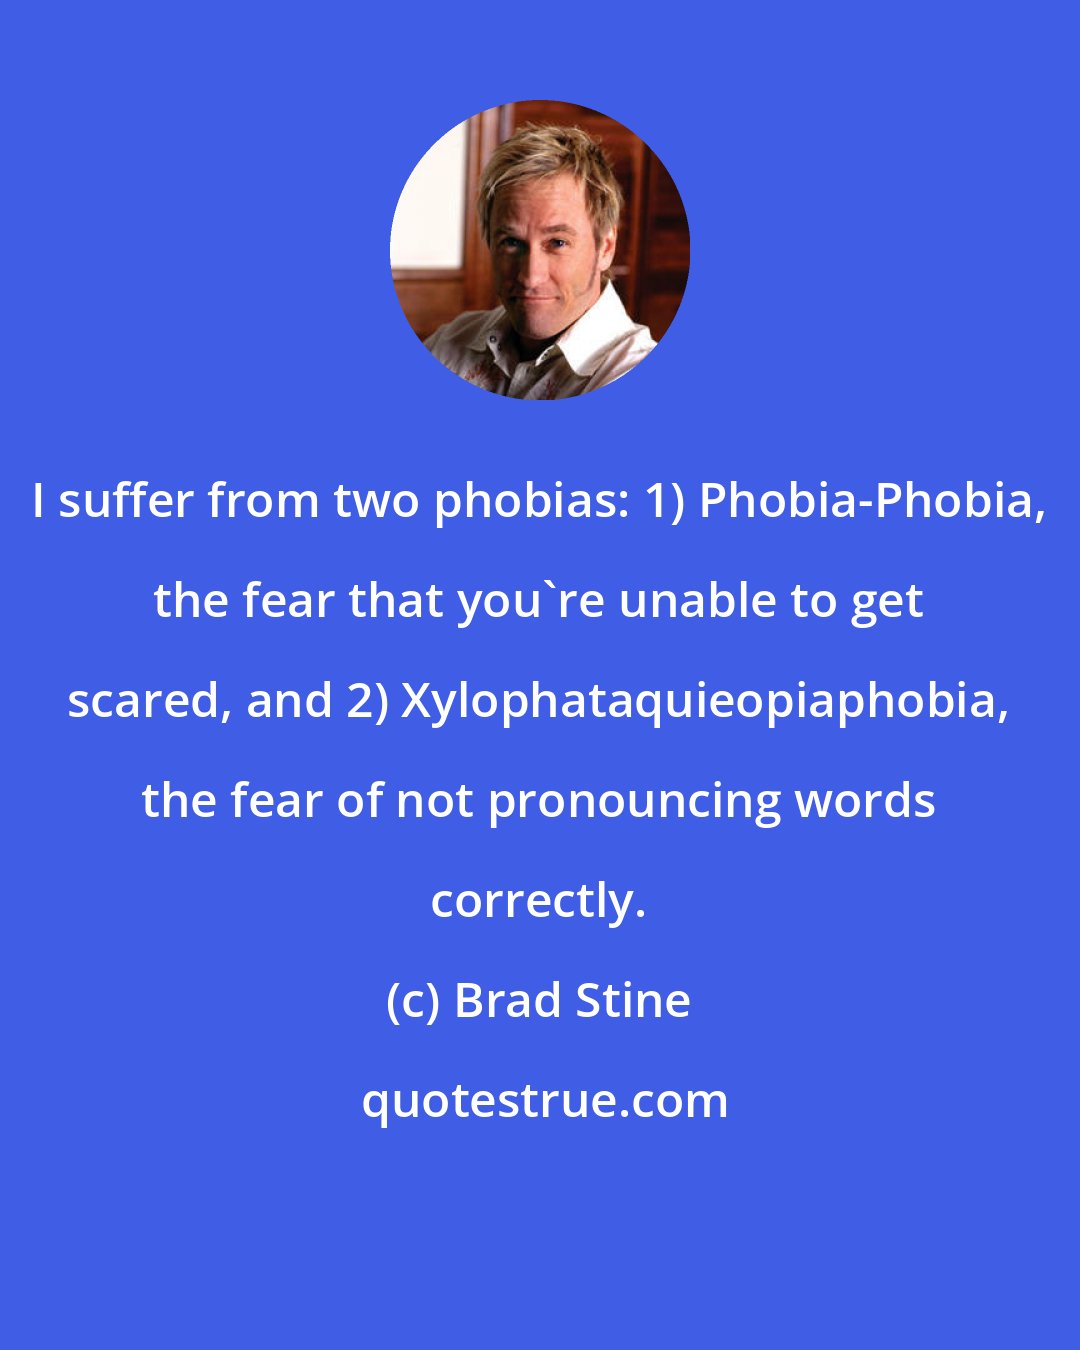 Brad Stine: I suffer from two phobias: 1) Phobia-Phobia, the fear that you're unable to get scared, and 2) Xylophataquieopiaphobia, the fear of not pronouncing words correctly.